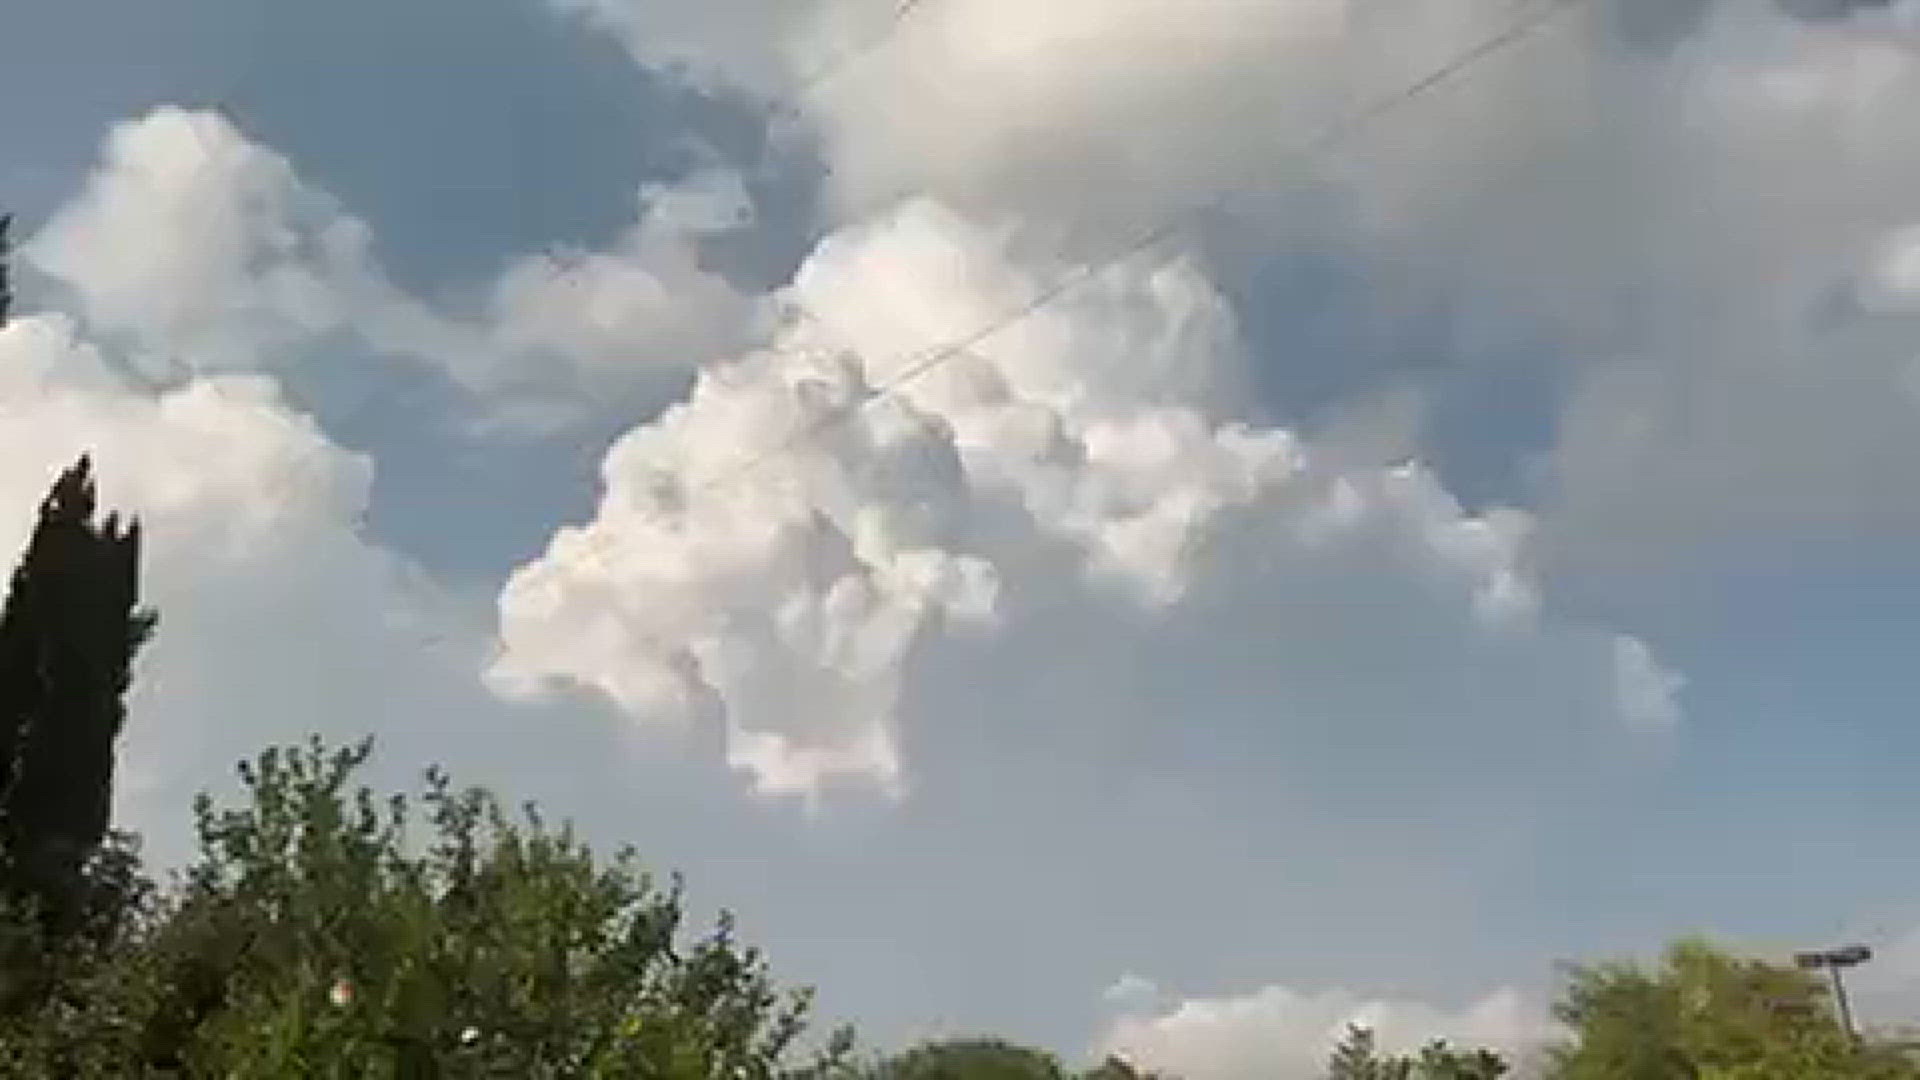 Timelapse of the storms going up in West Plano over about 2-3 minutes
Credit: Juliana